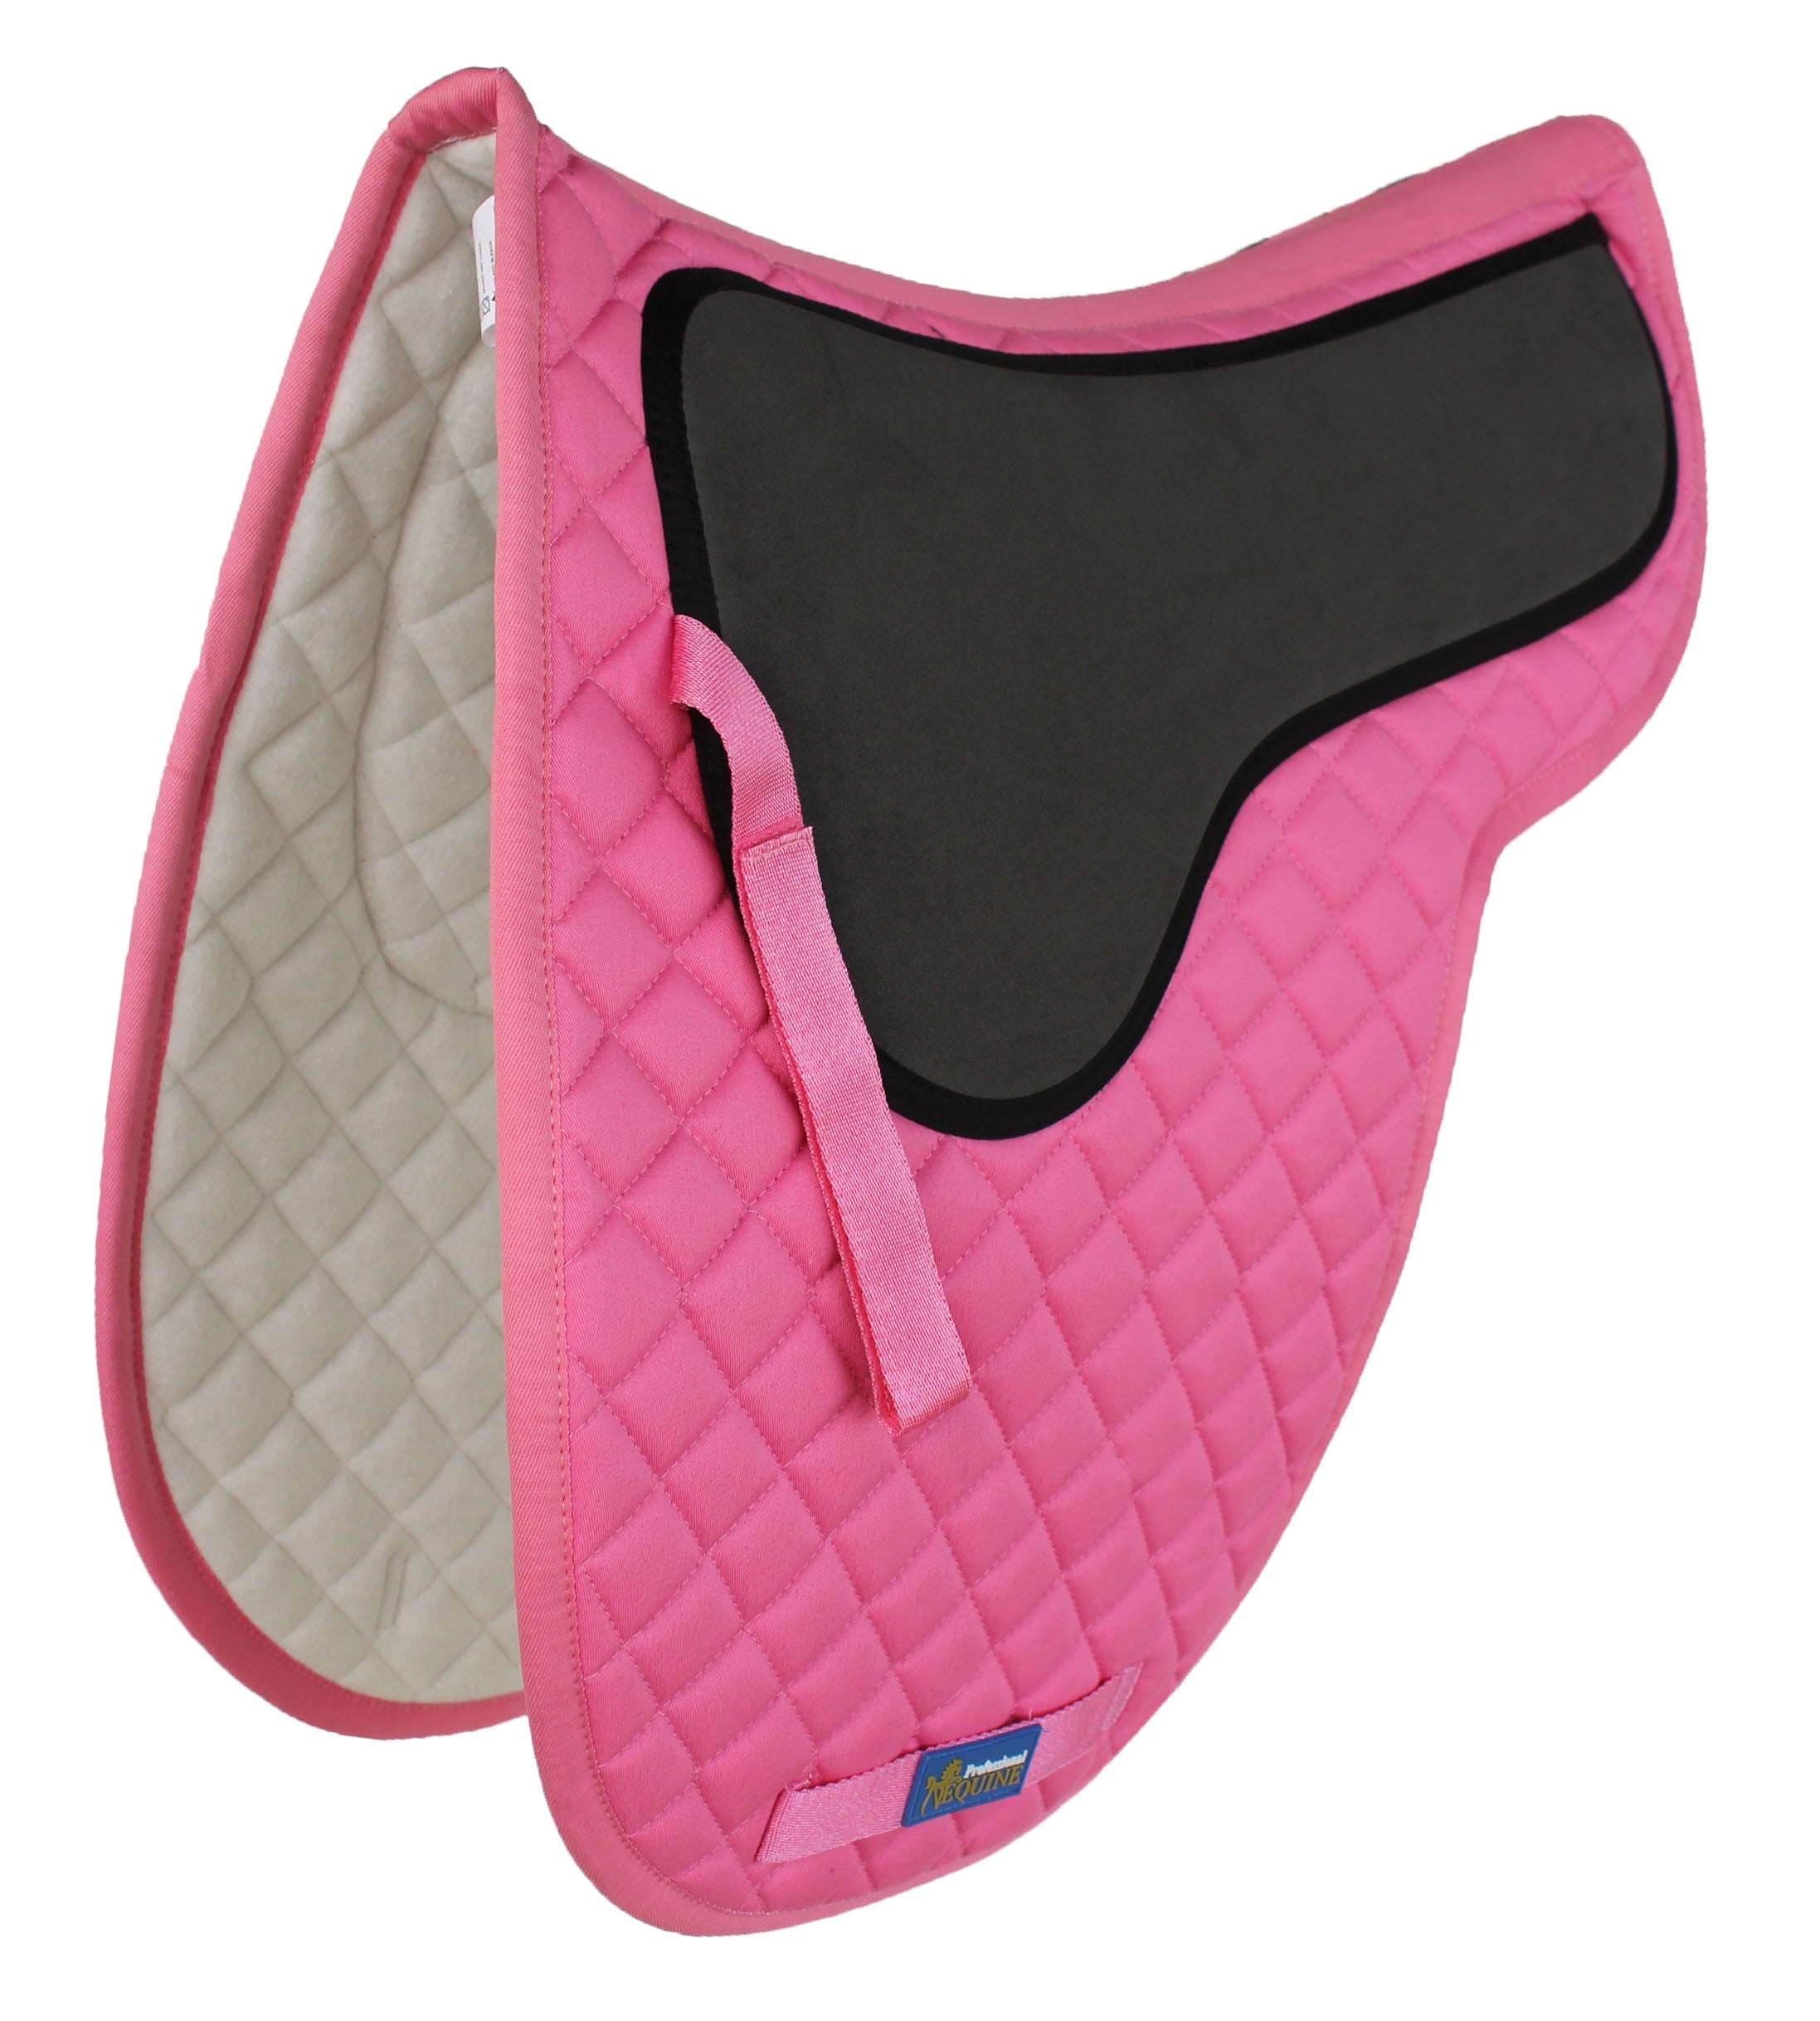 Tackus Horse Cotton Jumping Quilted English Saddle PAD Trail Contoured Gel RED 72F21 